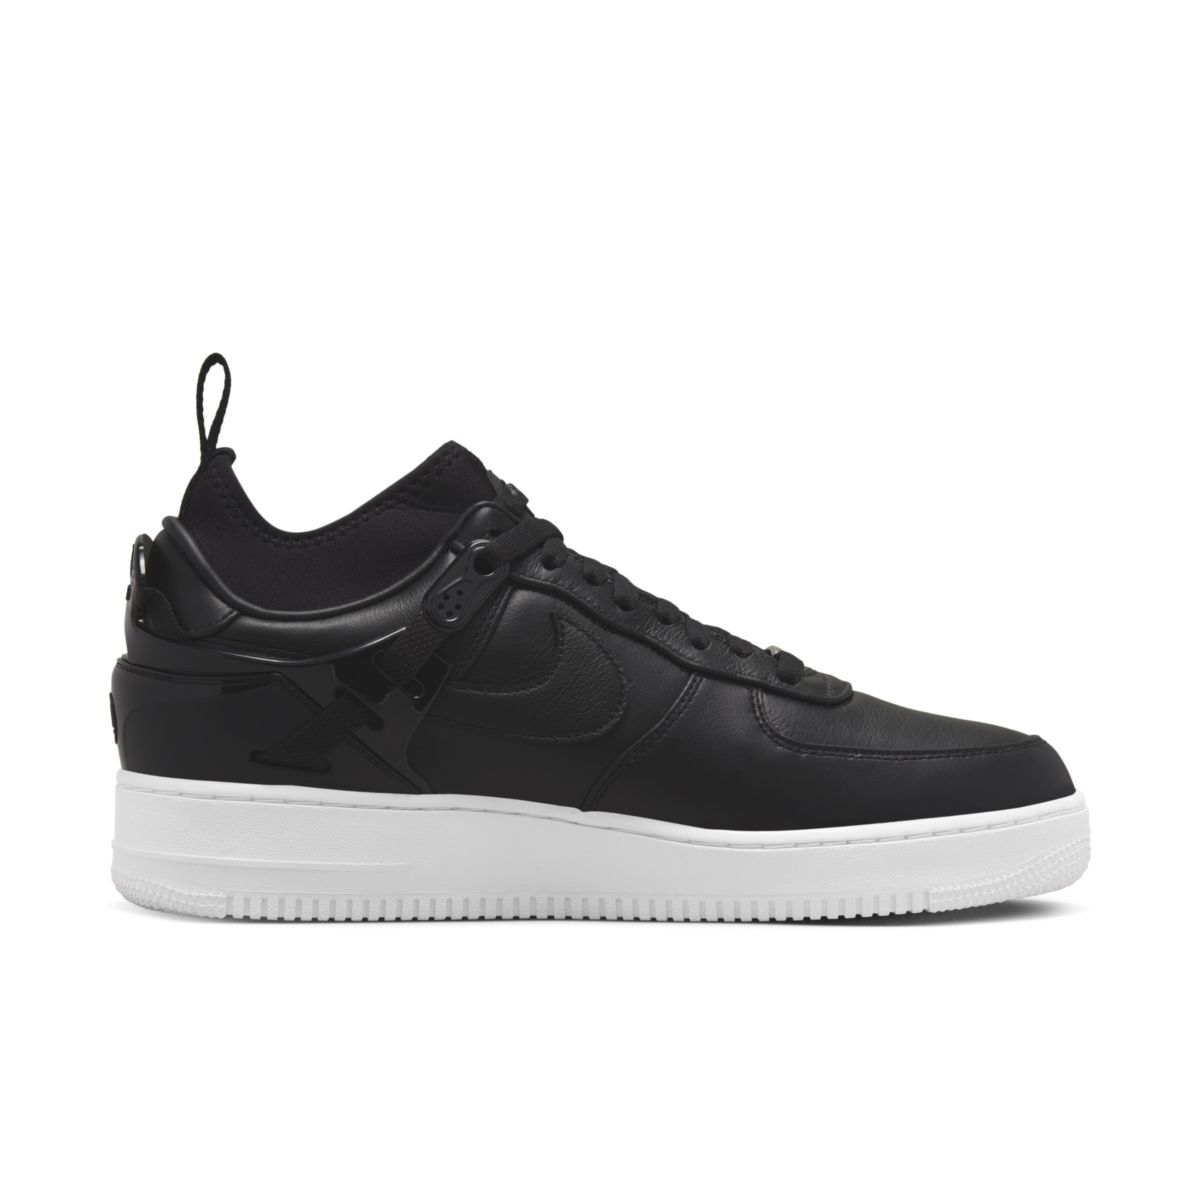 Undercover x Nike Air Force 1 Low Black DQ7558-002 3